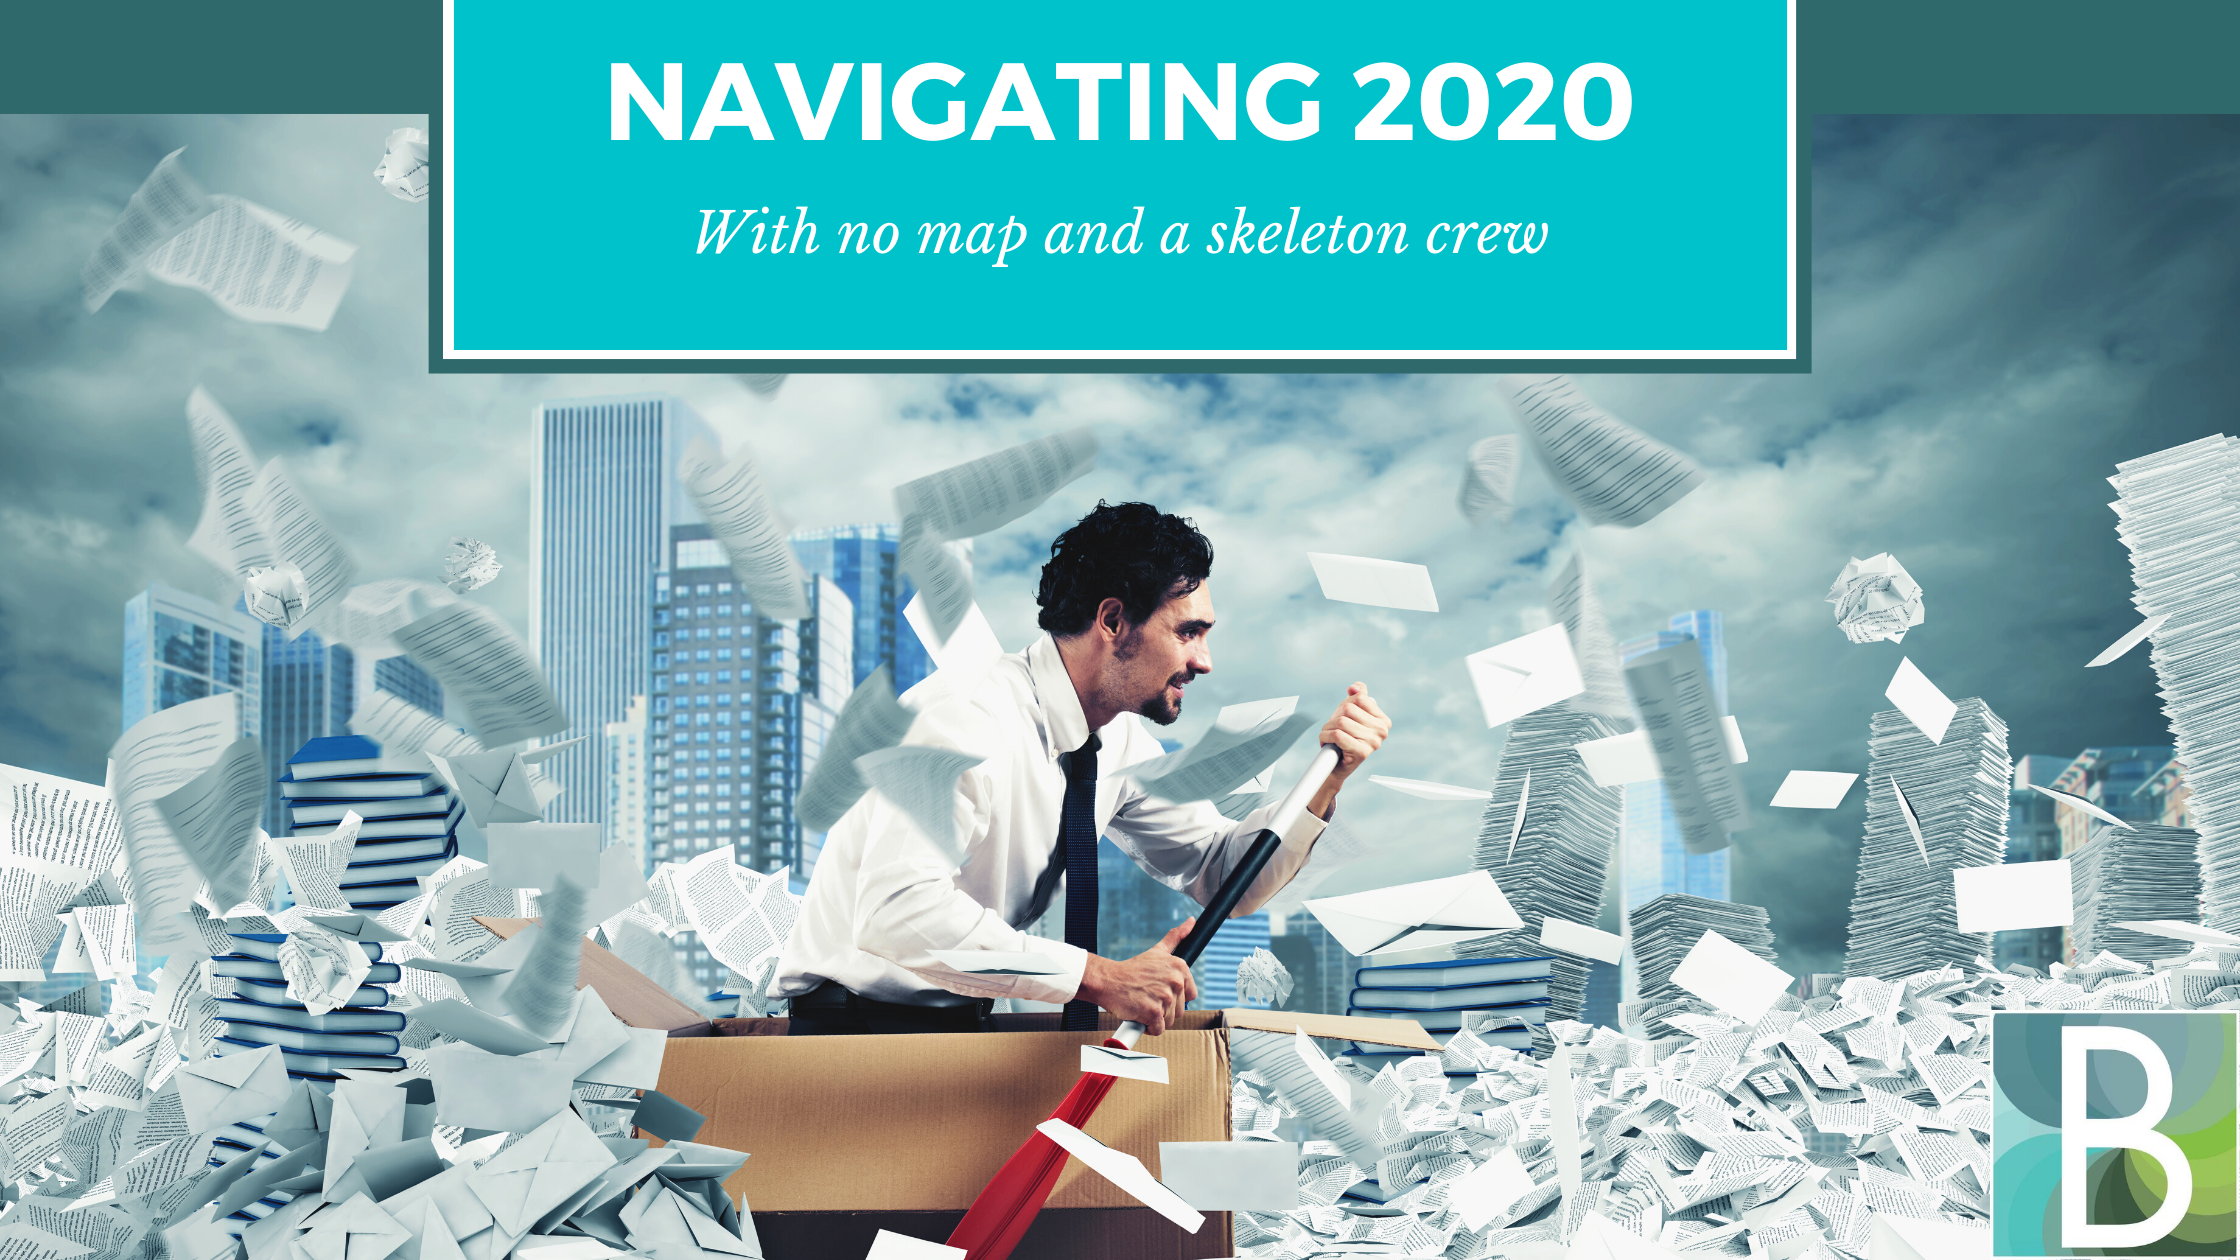 Navigating 2020 as a Business Owner